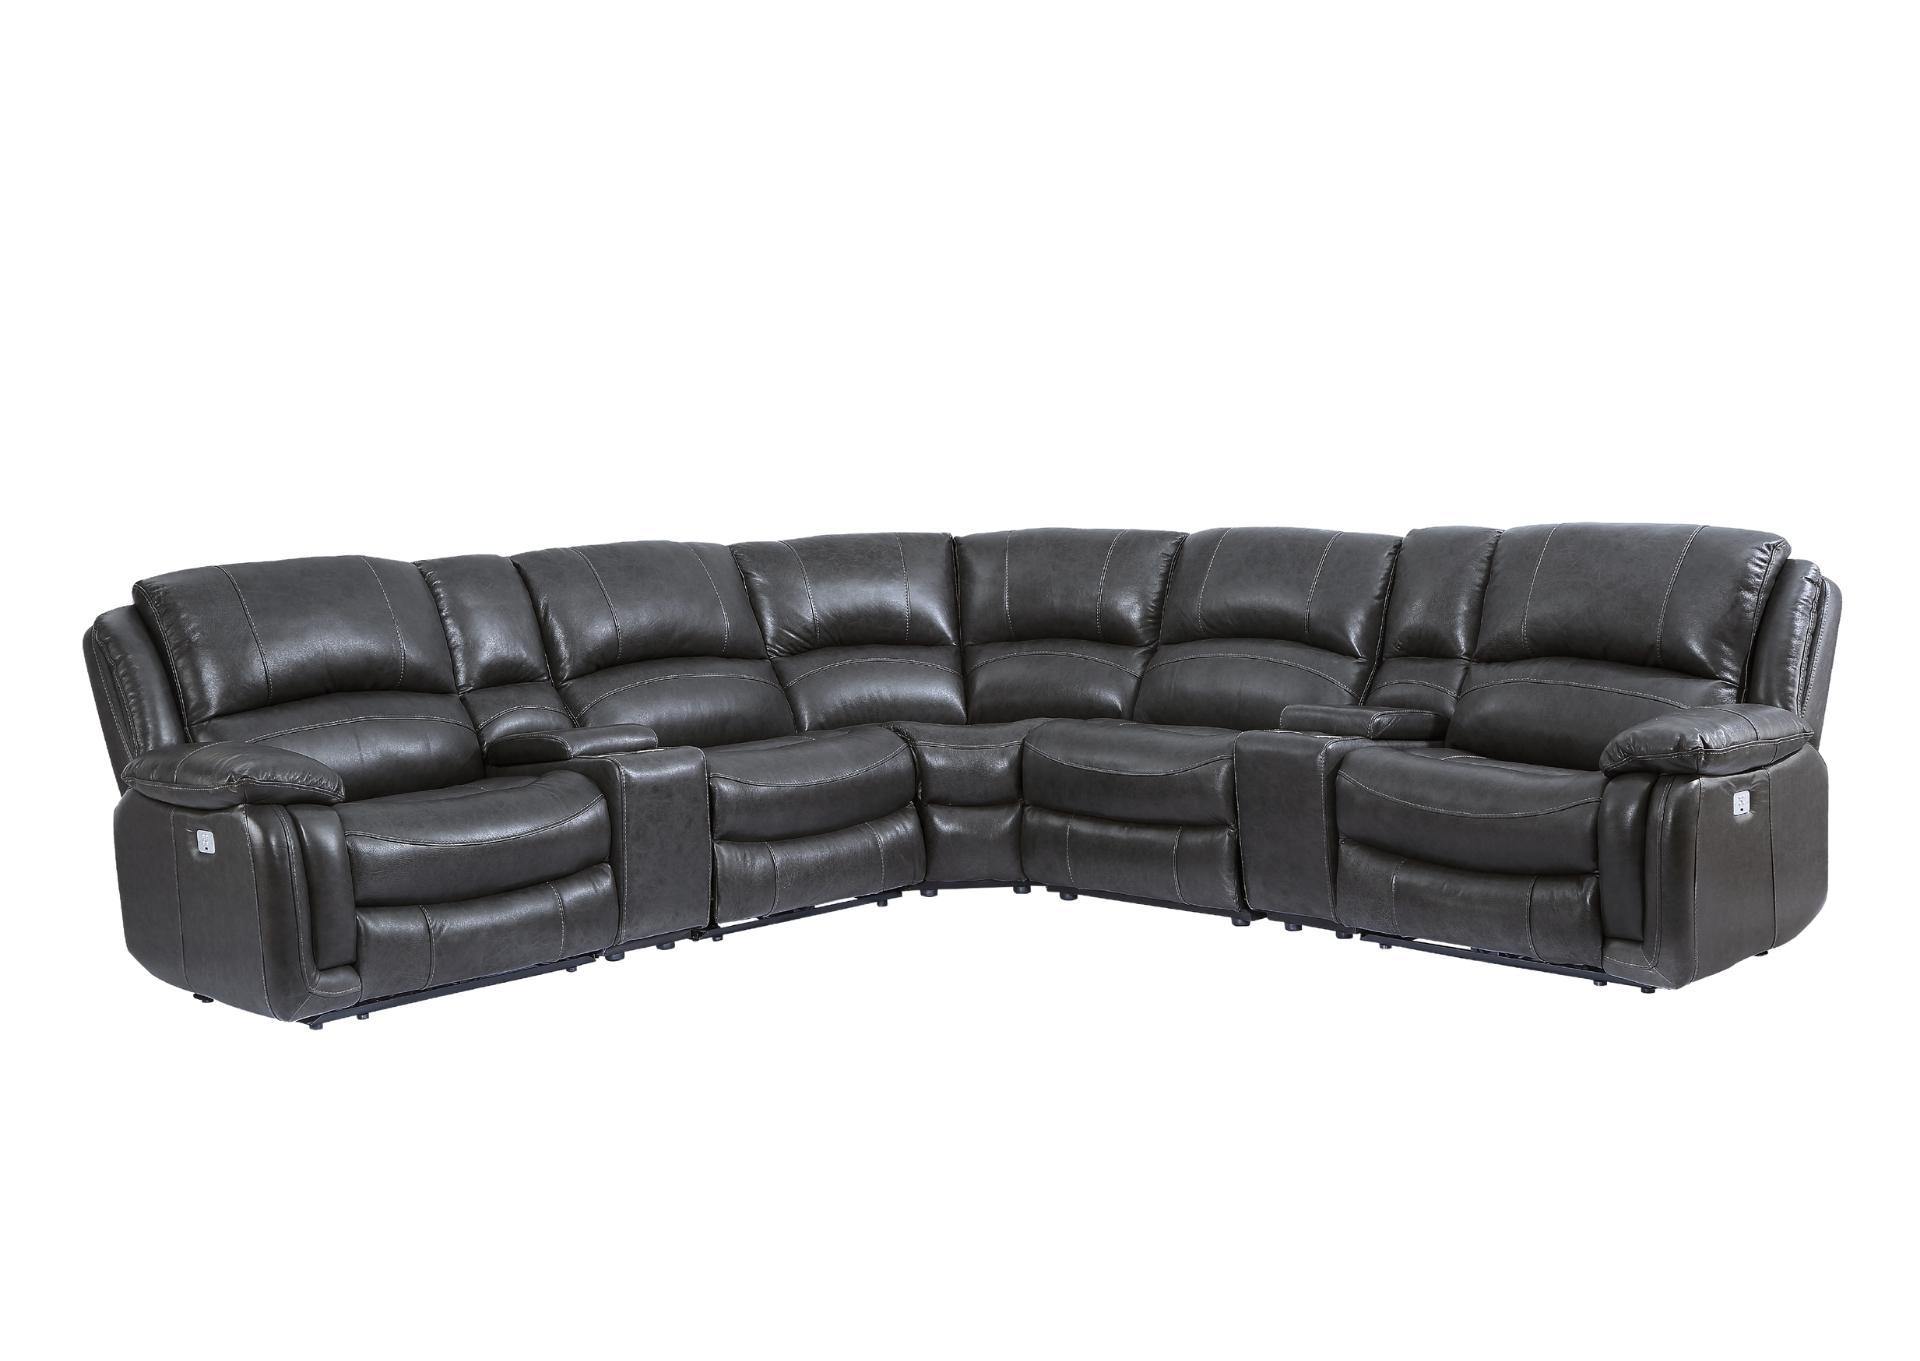 DENVERS 7 PIECE CHARCOAL LEATHER SECTIONAL